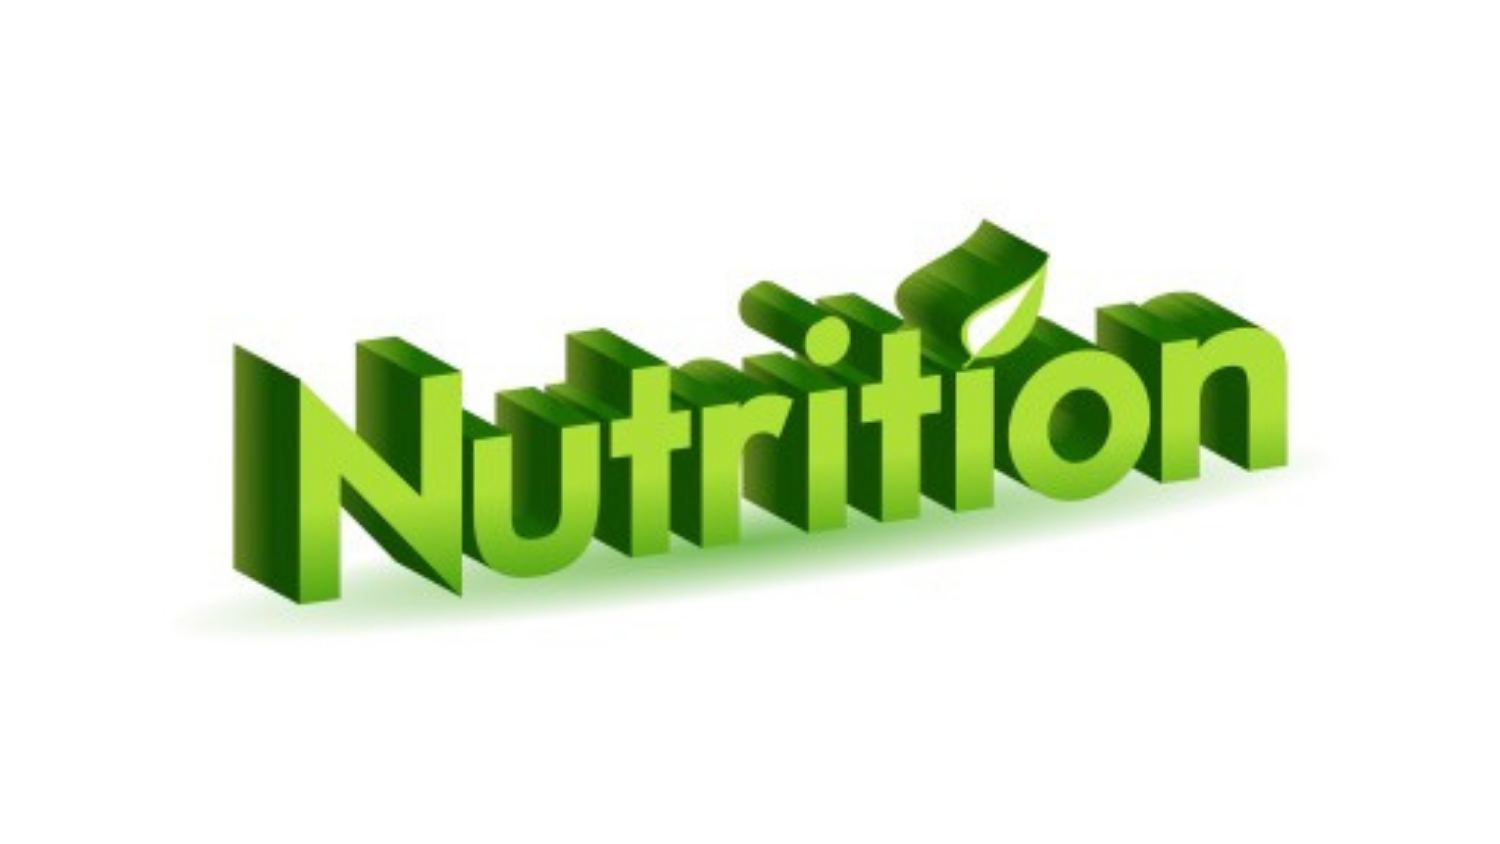 4 Nutritional Facts for Fat Loss or Muscle Building